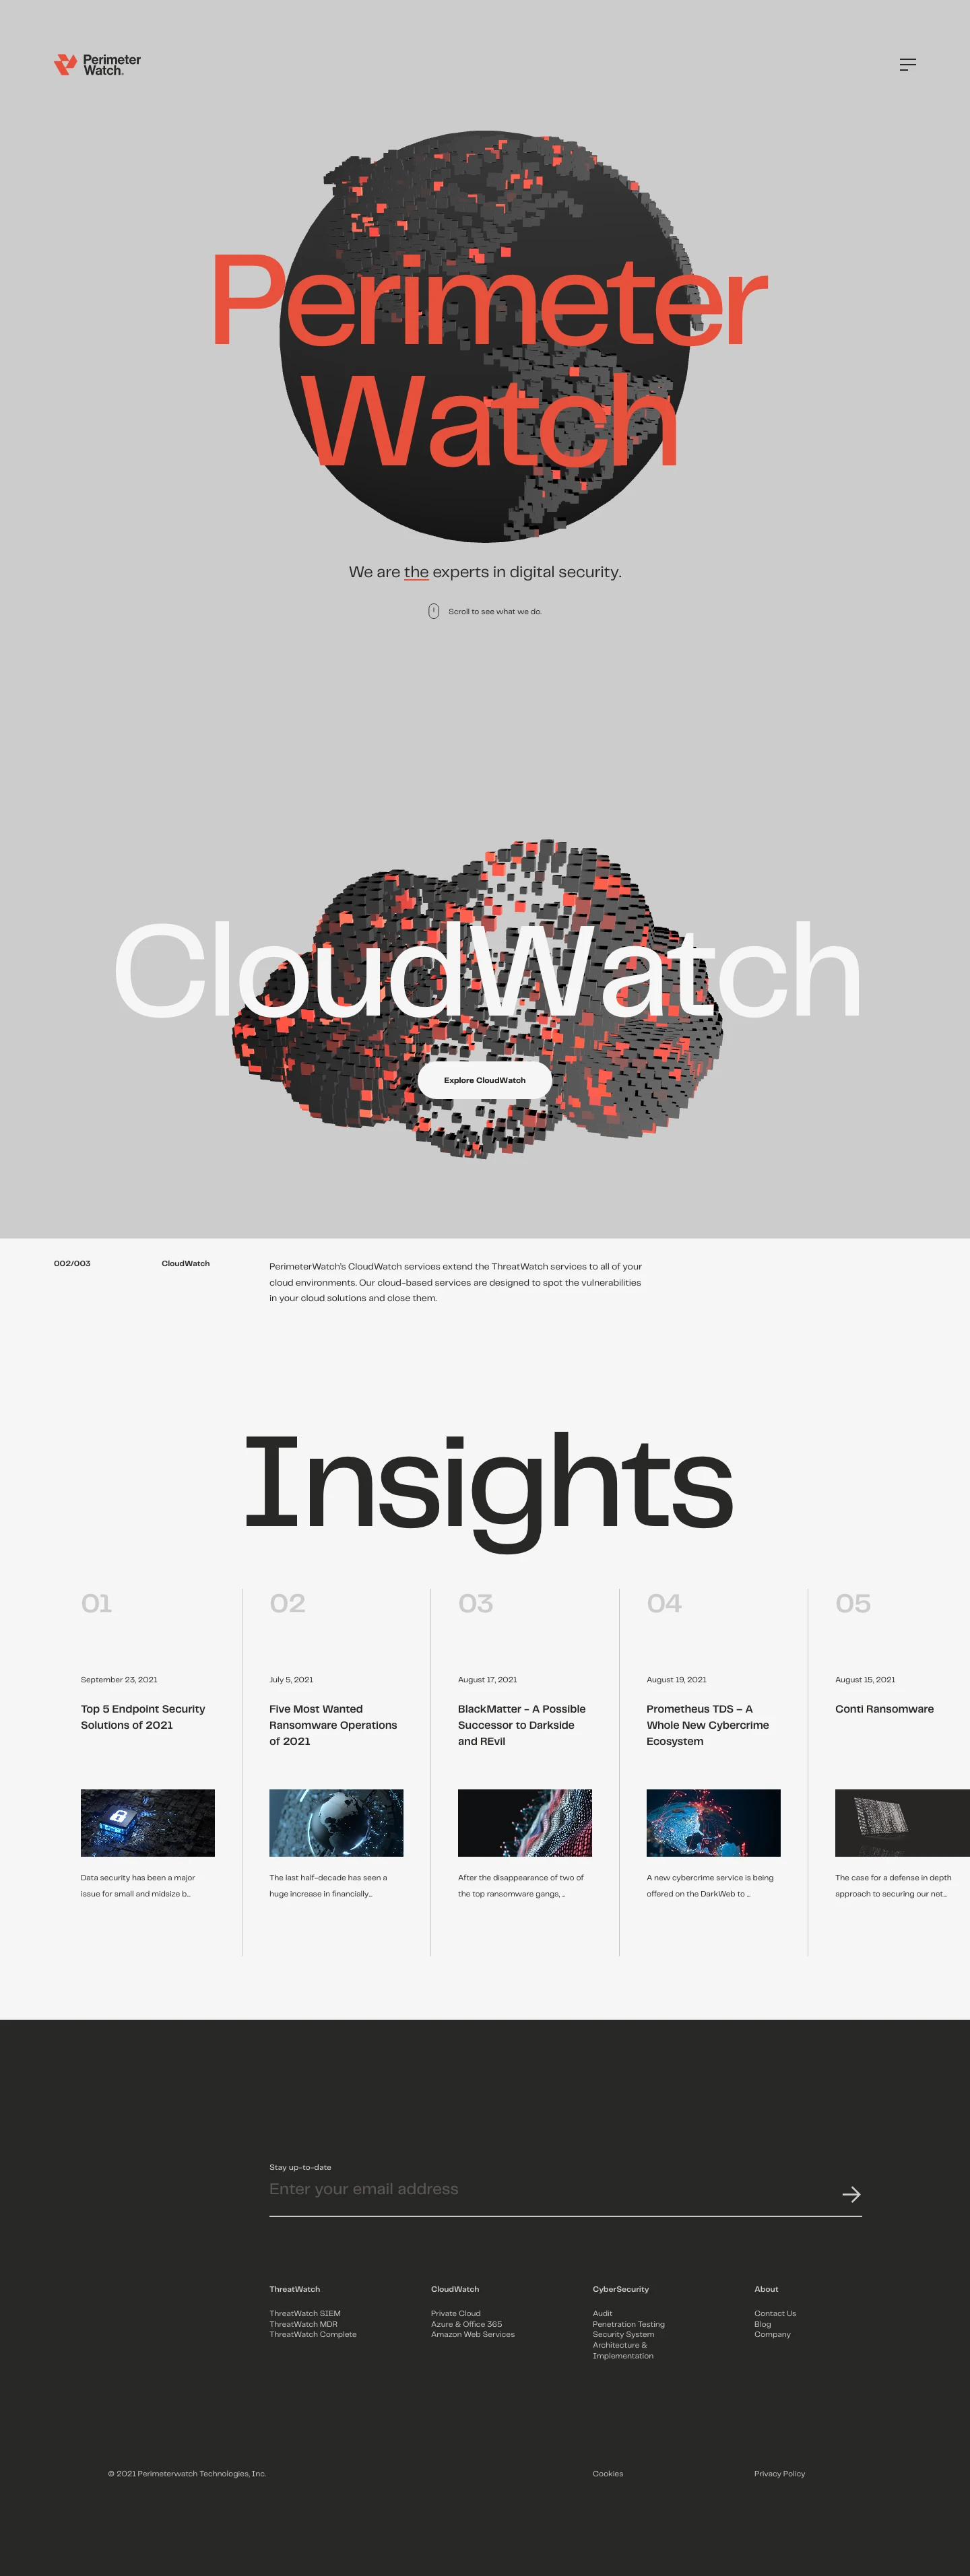 PerimeterWatch Landing Page Example: PerimeterWatch empowers today’s businesses with the latest in network security intelligence and infrastructure. 